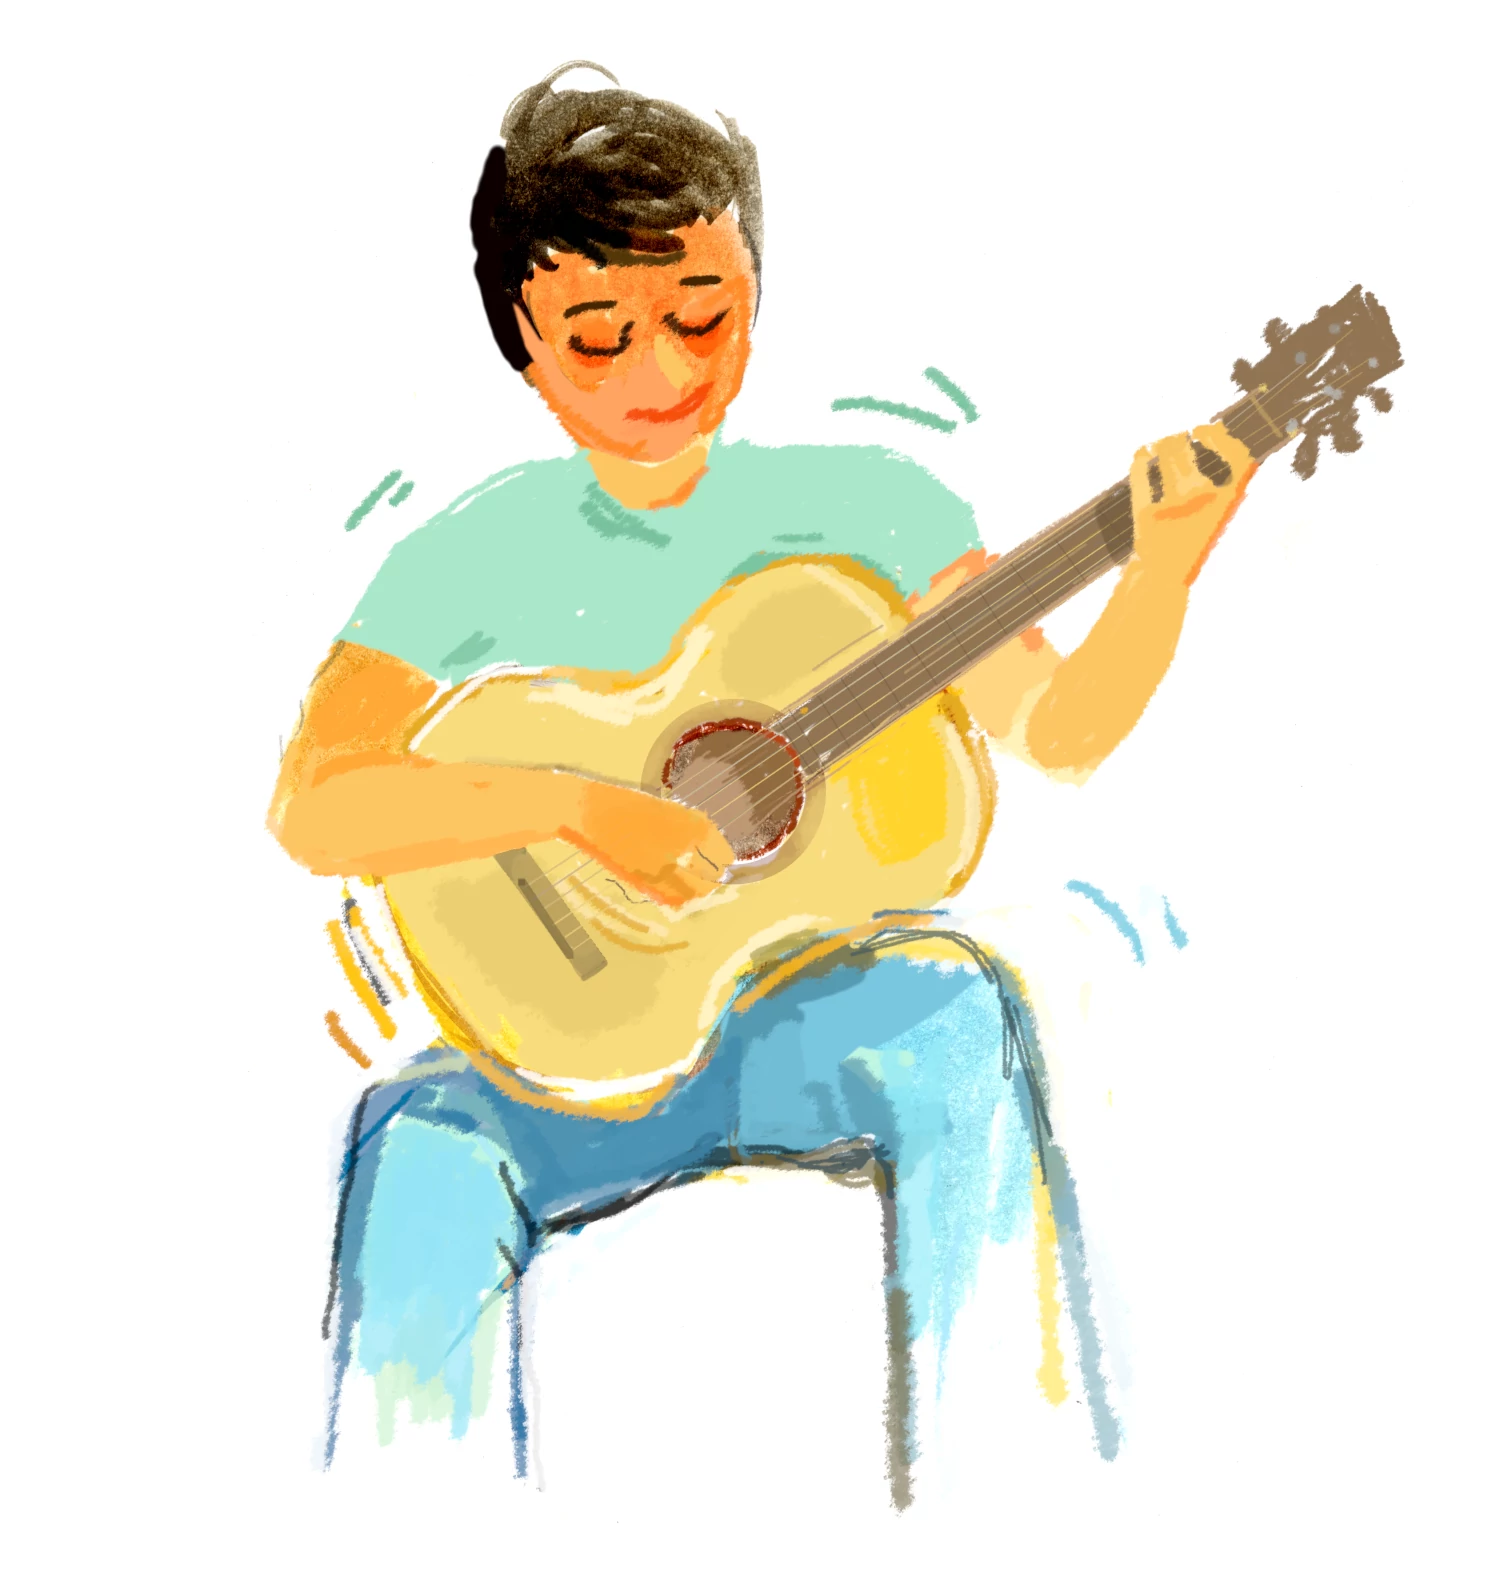 A kid playing guitar